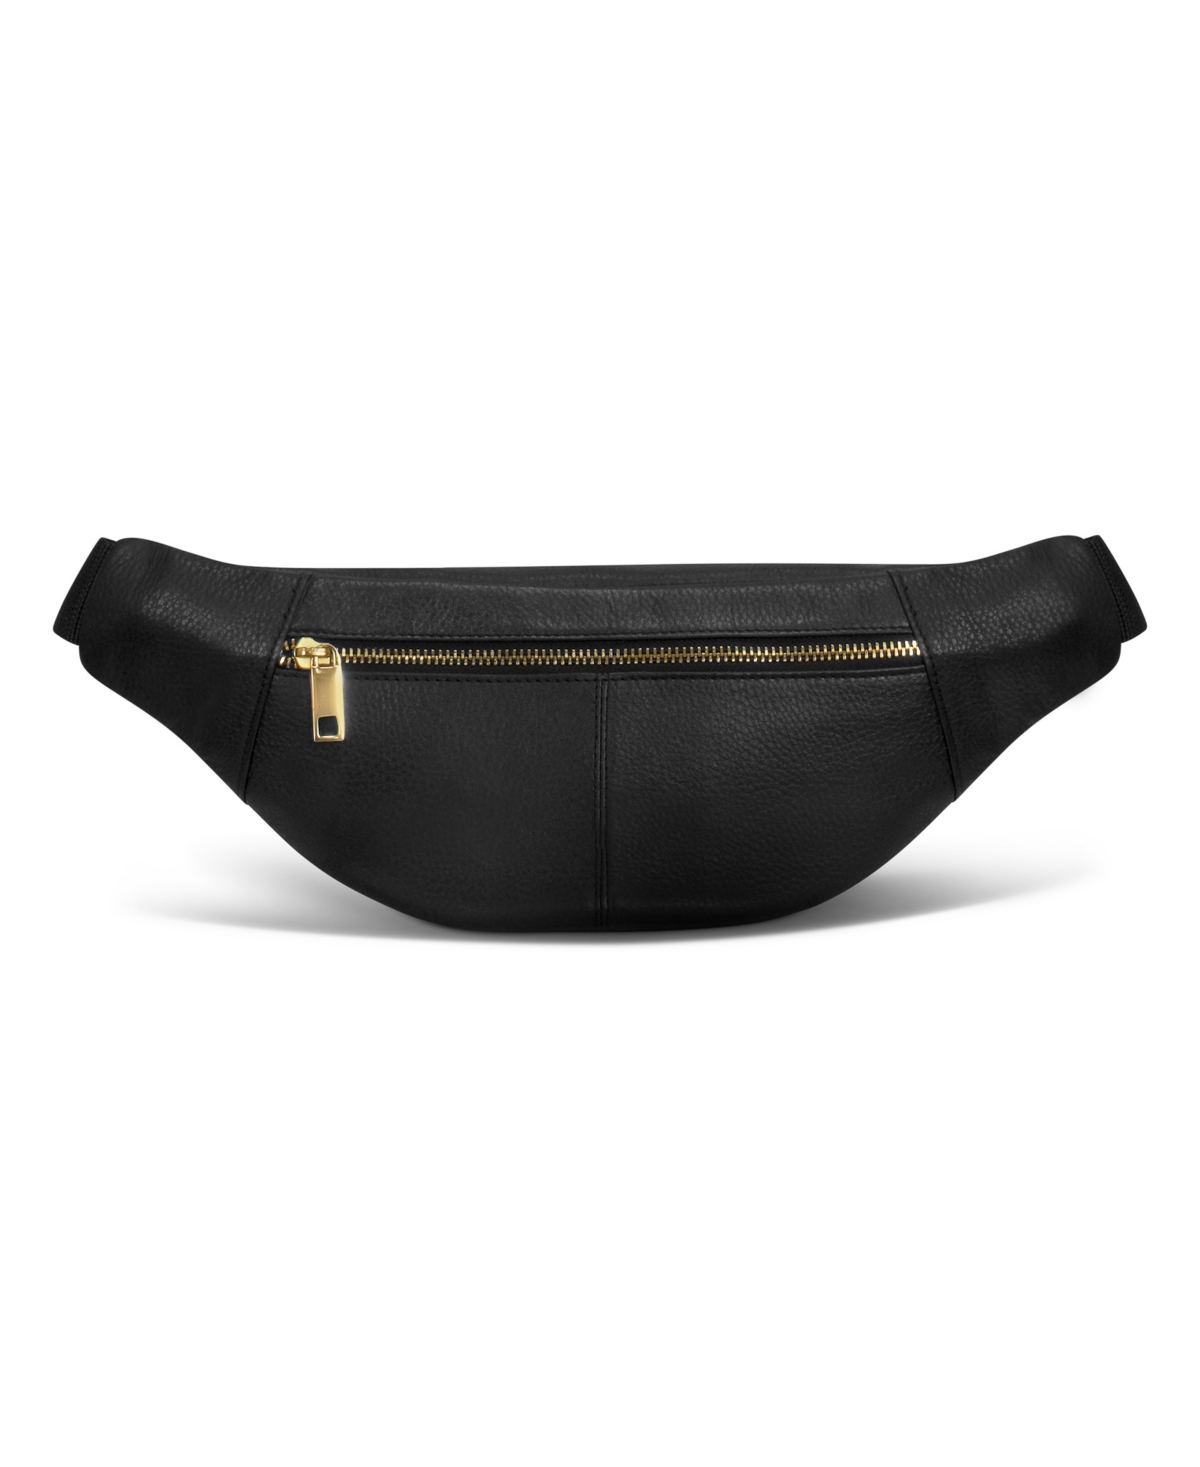 Shop Champs Leather Waist-pack In Black